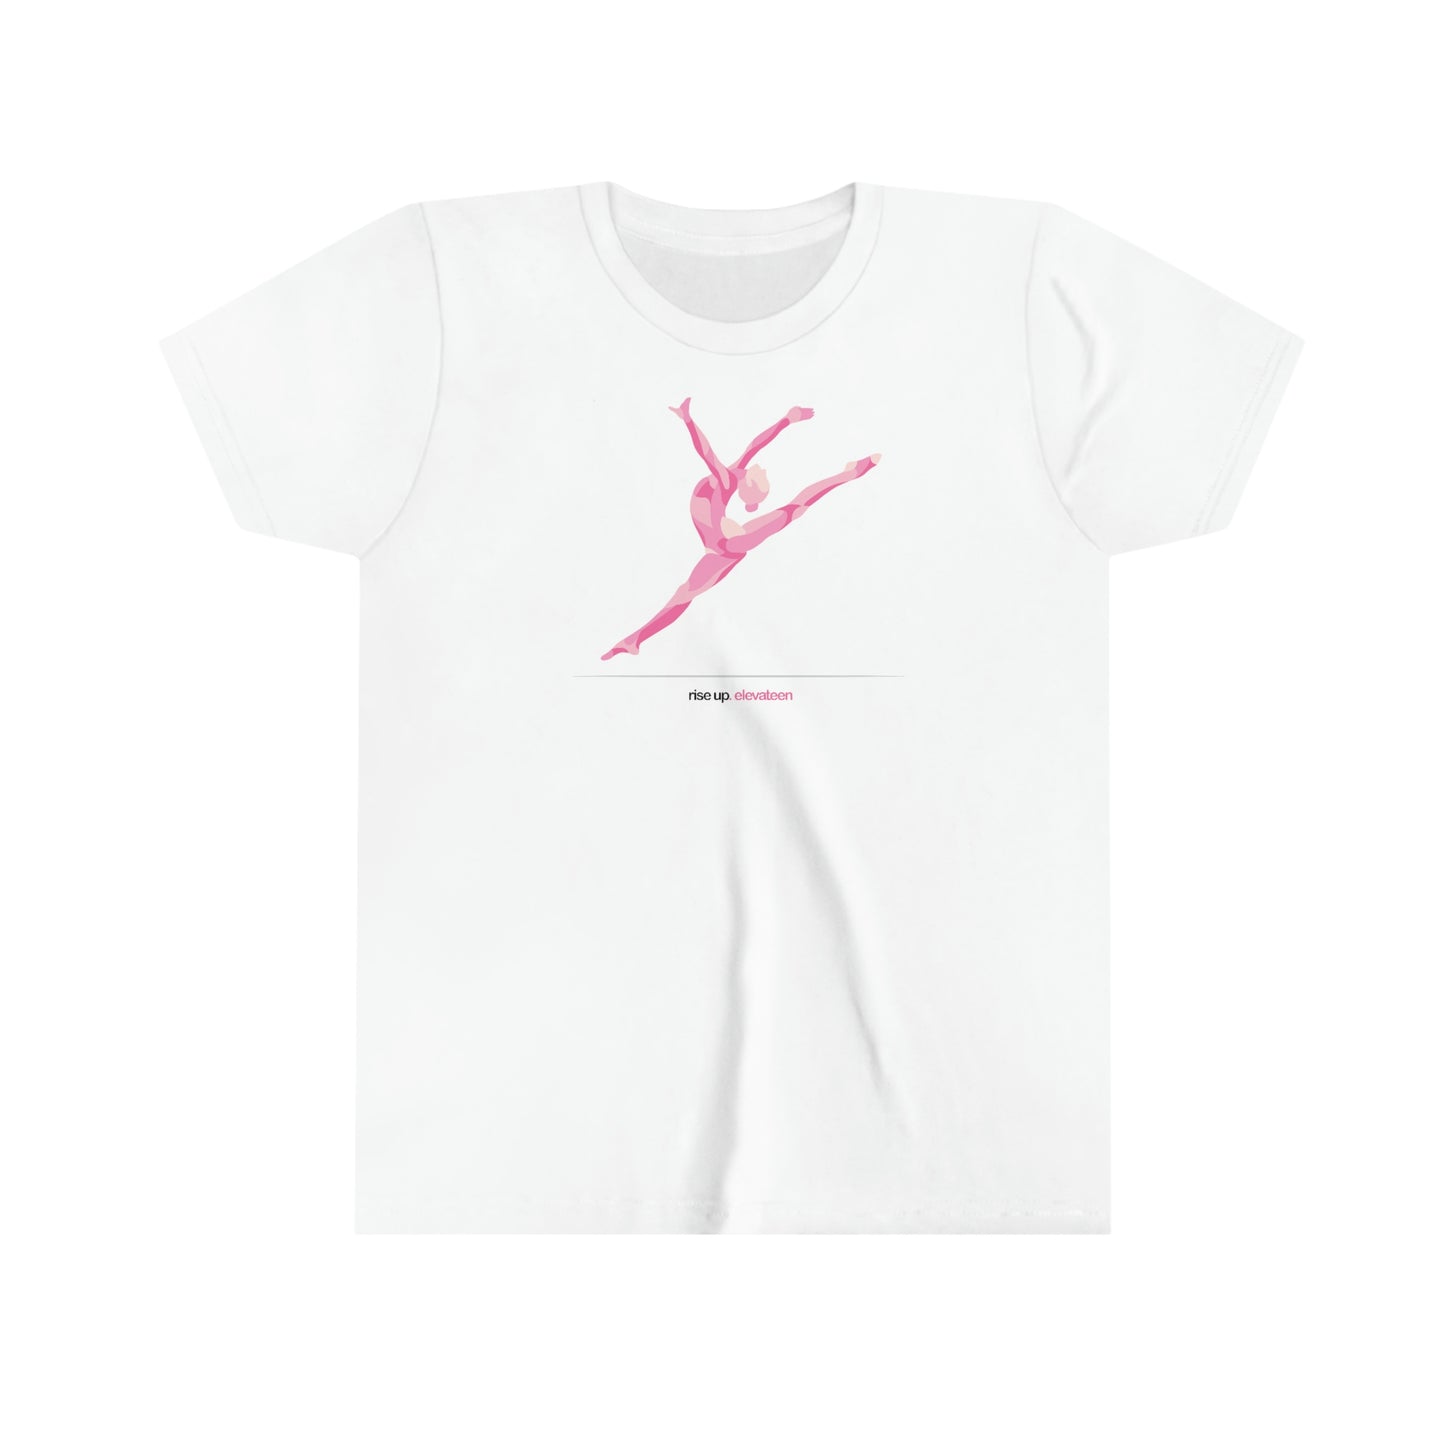 Kids | Gymnastics Girls / Youth tee / t-shirt | *RISE UP* Collection | 002p